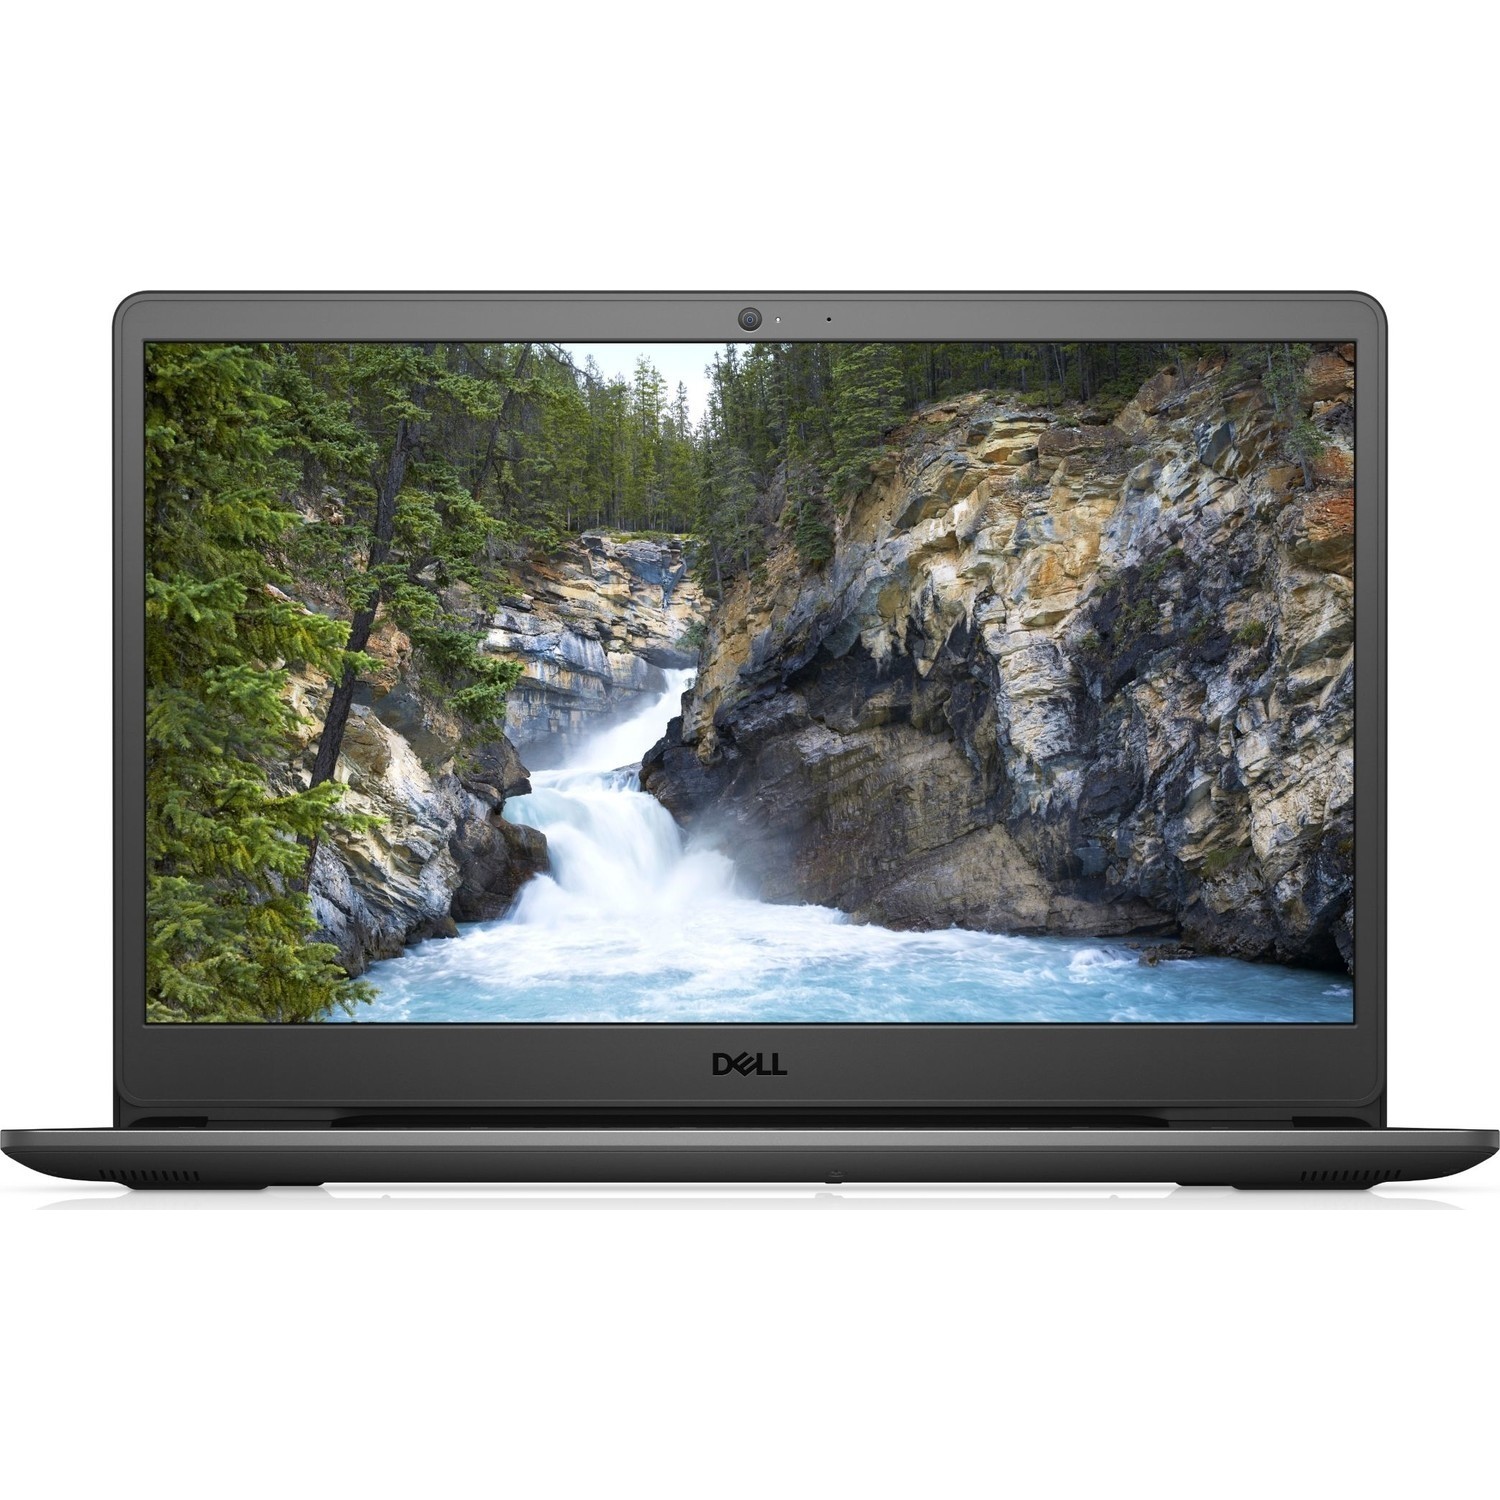 Dell Inspiron 15 3501 Notebook